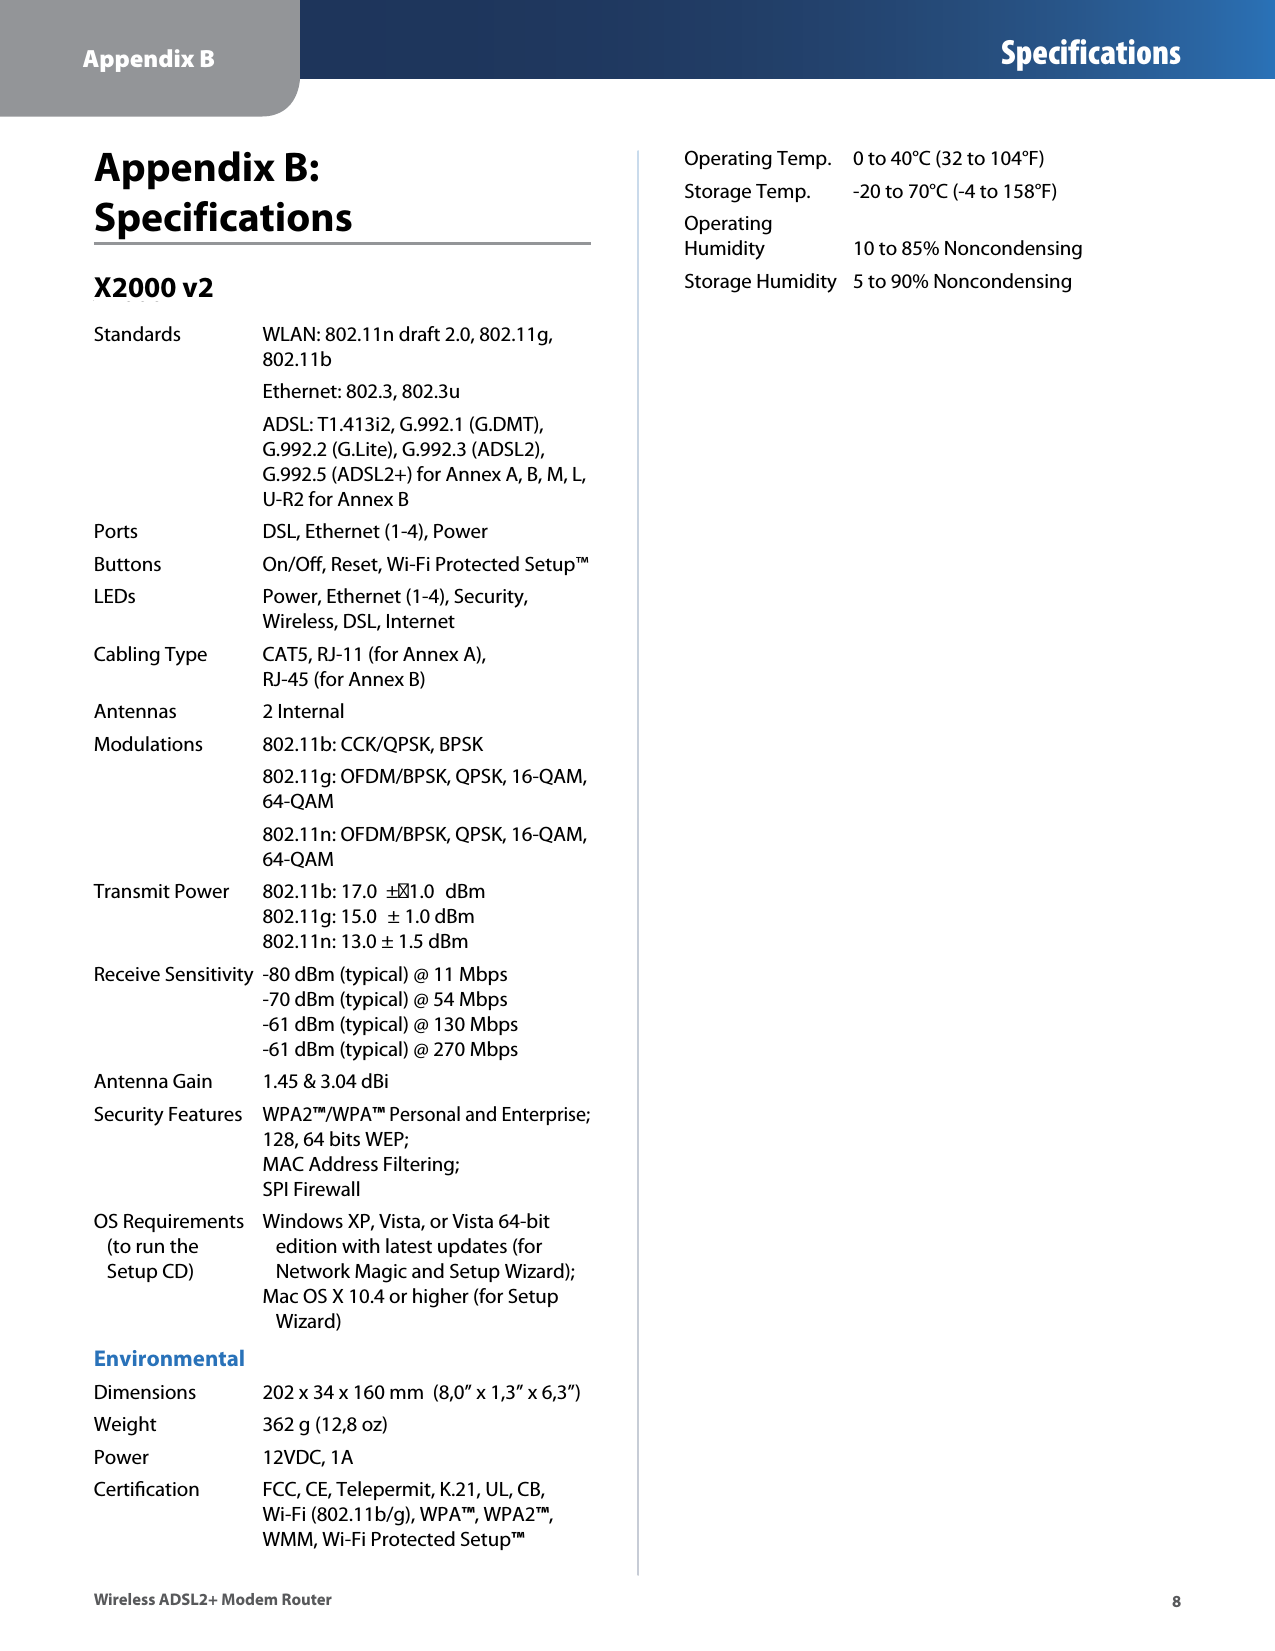 Appendix B Specifications8Wireless ADSL2+ Modem RouterAppendix B:  SpecificationsX2000Standards  WLAN: 802.11n draft 2.0, 802.11g,    802.11b  Ethernet: 802.3, 802.3u  ADSL: T1.413i2, G.992.1 (G.DMT),    G.992.2 (G.Lite), G.992.3 (ADSL2),    G.992.5 (ADSL2+) for Annex A, B, M, L,    U-R2 for Annex BPorts  DSL, Ethernet (1-4), PowerButtons  On/Oﬀ, Reset, Wi-Fi Protected Setup™LEDs  Power, Ethernet (1-4), Security,    Wireless, DSL, InternetCabling Type  CAT5, RJ-11 (for Annex A),    RJ-45 (for Annex B)Antennas  2 InternalModulations  802.11b: CCK/QPSK, BPSK  802.11g: OFDM/BPSK, QPSK, 16-QAM,    64-QAM  802.11n: OFDM/BPSK, QPSK, 16-QAM,    64-QAMTransmit Power  802.11b: 17.0  ±1.0 dBm  802.11g: 15.0± 1.0 dBm   802.11n: 13.0 ± 1.5 dBmReceive Sensitivity  -80 dBm (typical) @ 11 Mbps   -70 dBm (typical) @ 54 Mbps   -61 dBm (typical) @ 130 Mbps   -61 dBm (typical) @ 270 MbpsAntenna Gain  1.45 &amp; 3.04 dBiSecurity Features WPA2™/WPA™ Personal and Enterprise;  128, 64 bits WEP;   MAC Address Filtering;   SPI FirewallOS Requirements  Windows XP, Vista, or Vista 64-bit     (to run the     edition with latest updates (for     Setup CD)     Network Magic and Setup Wizard);   Mac OS X 10.4 or higher (for Setup       Wizard)EnvironmentalDimensions  202 x 34 x 160 mm  (8,0” x 1,3” x 6,3”)Weight  362 g (12,8 oz)Power  12VDC, 1ACertiﬁcation  FCC, CE, Telepermit, K.21, UL, CB,    Wi-Fi (802.11b/g), WPA™, WPA2™,   WMM, Wi-Fi Protected Setup™Operating Temp.  0 to 40°C (32 to 104°F)Storage Temp.  -20 to 70°C (-4 to 158°F)Operating Humidity  10 to 85% NoncondensingStorage Humidity  5 to 90% NoncondensingX2000 v2  